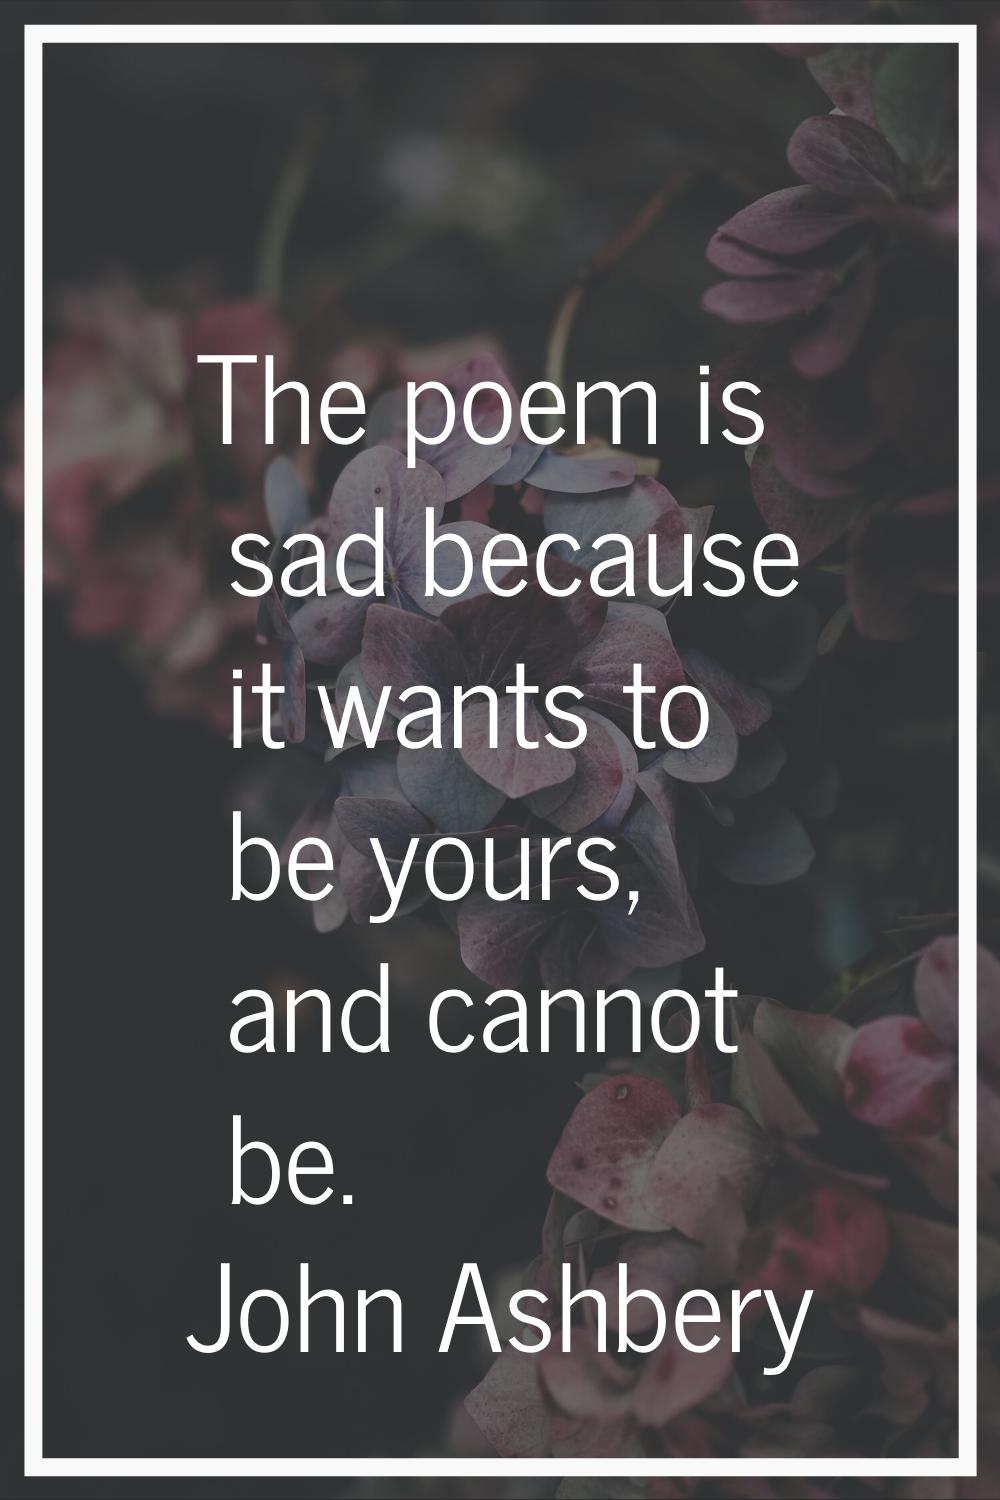 The poem is sad because it wants to be yours, and cannot be.